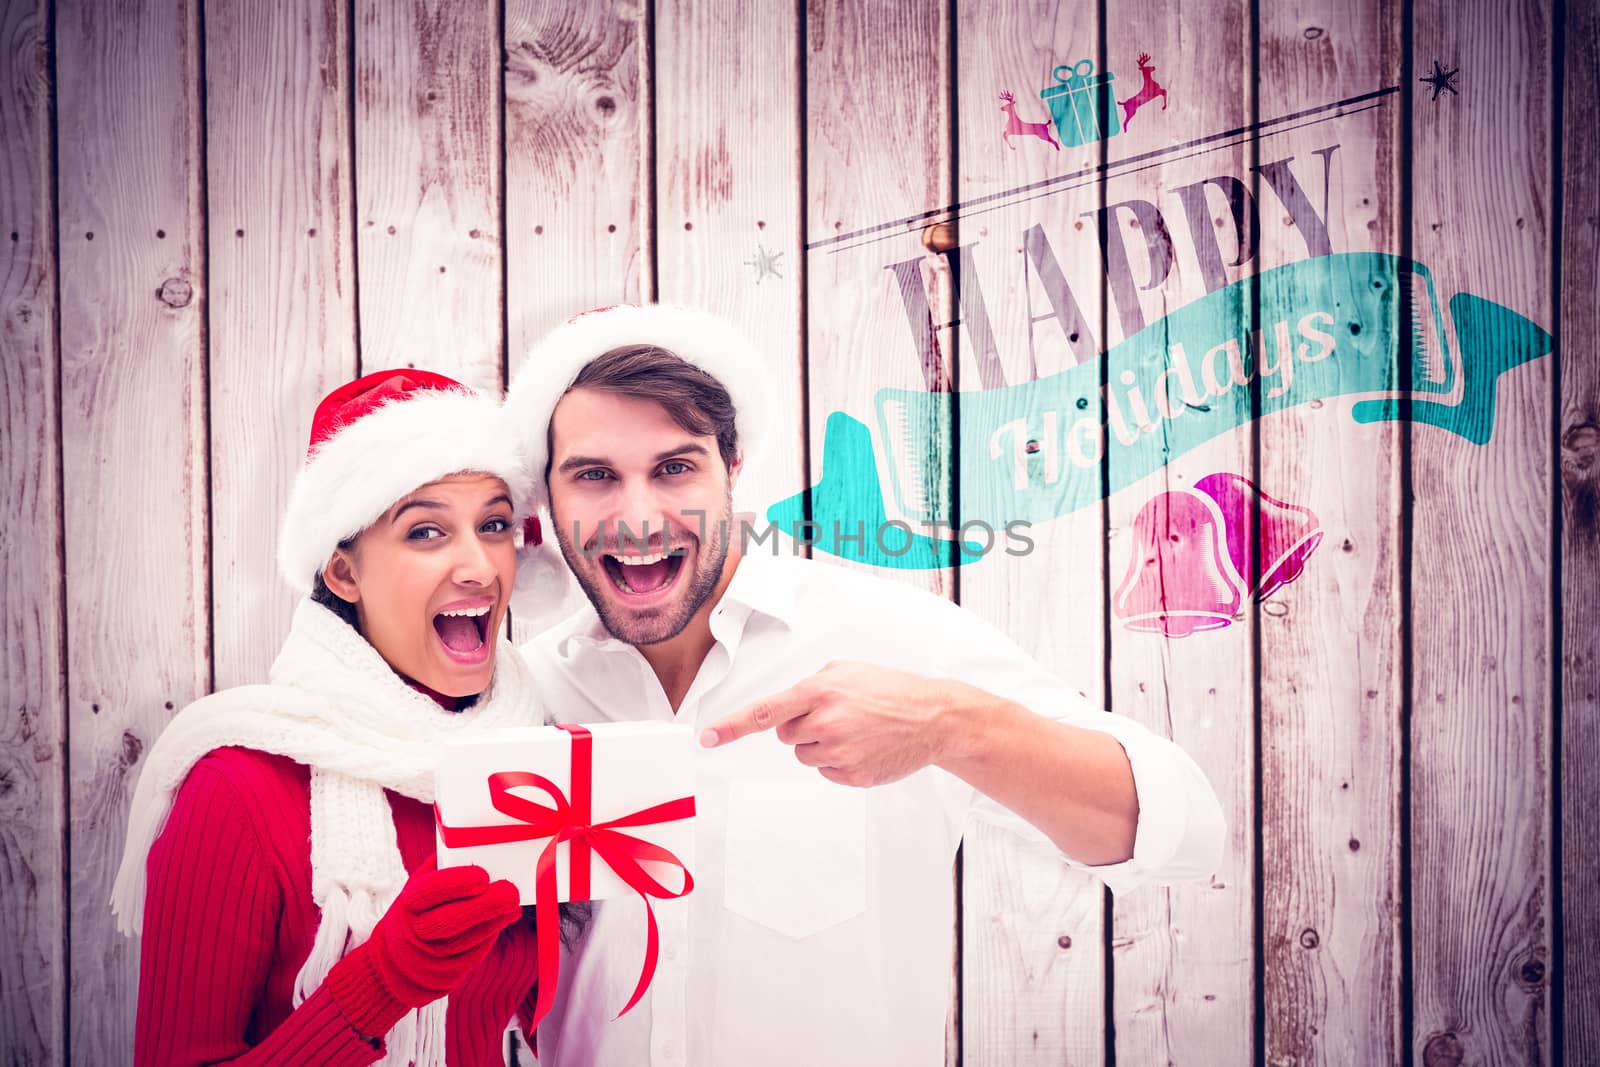 Composite image of festive young couple holding gift by Wavebreakmedia